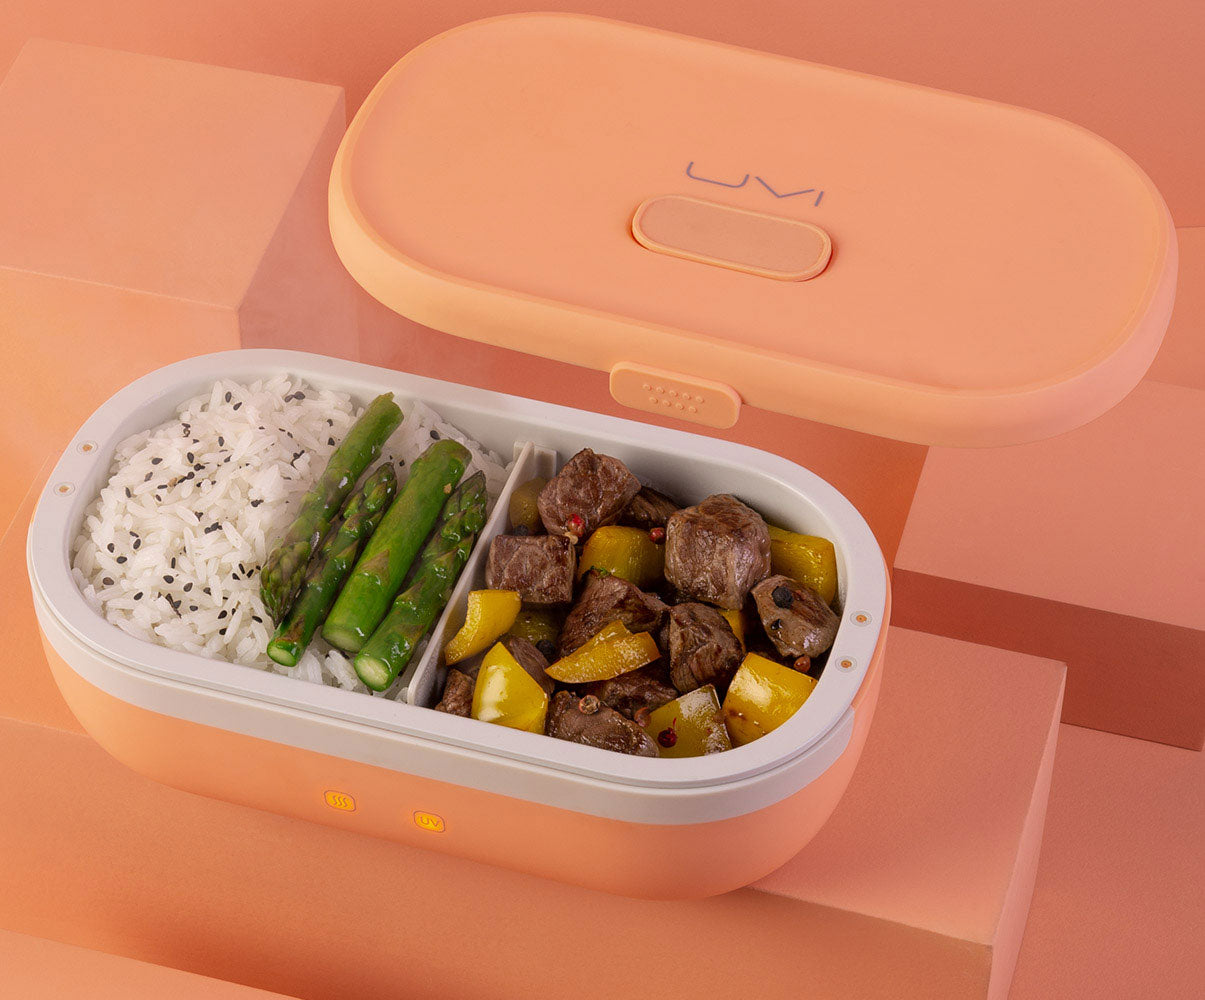 UVI, The Self Heating Lunch Box with Odor Killing UV Light